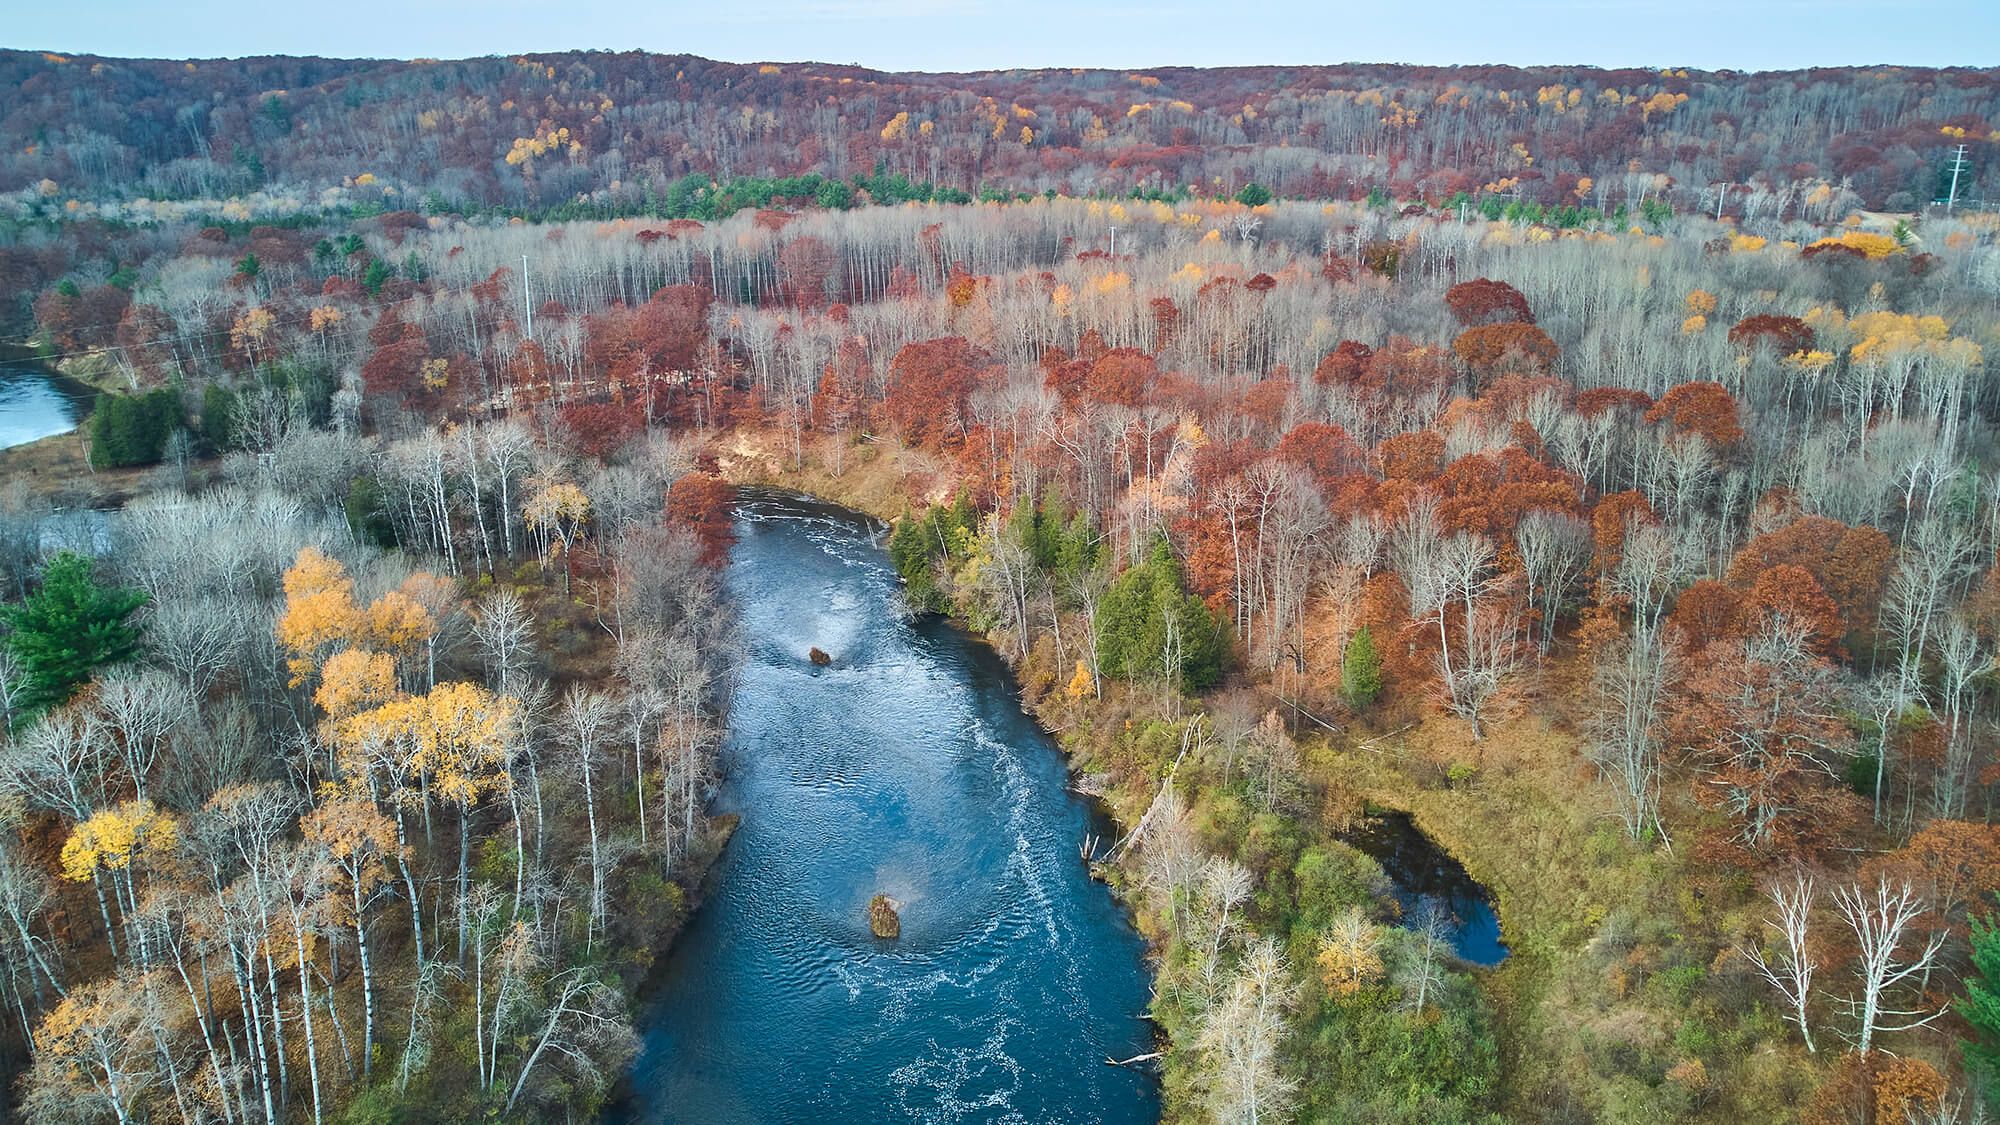 Backpacking Michigan's Manistee River Trail